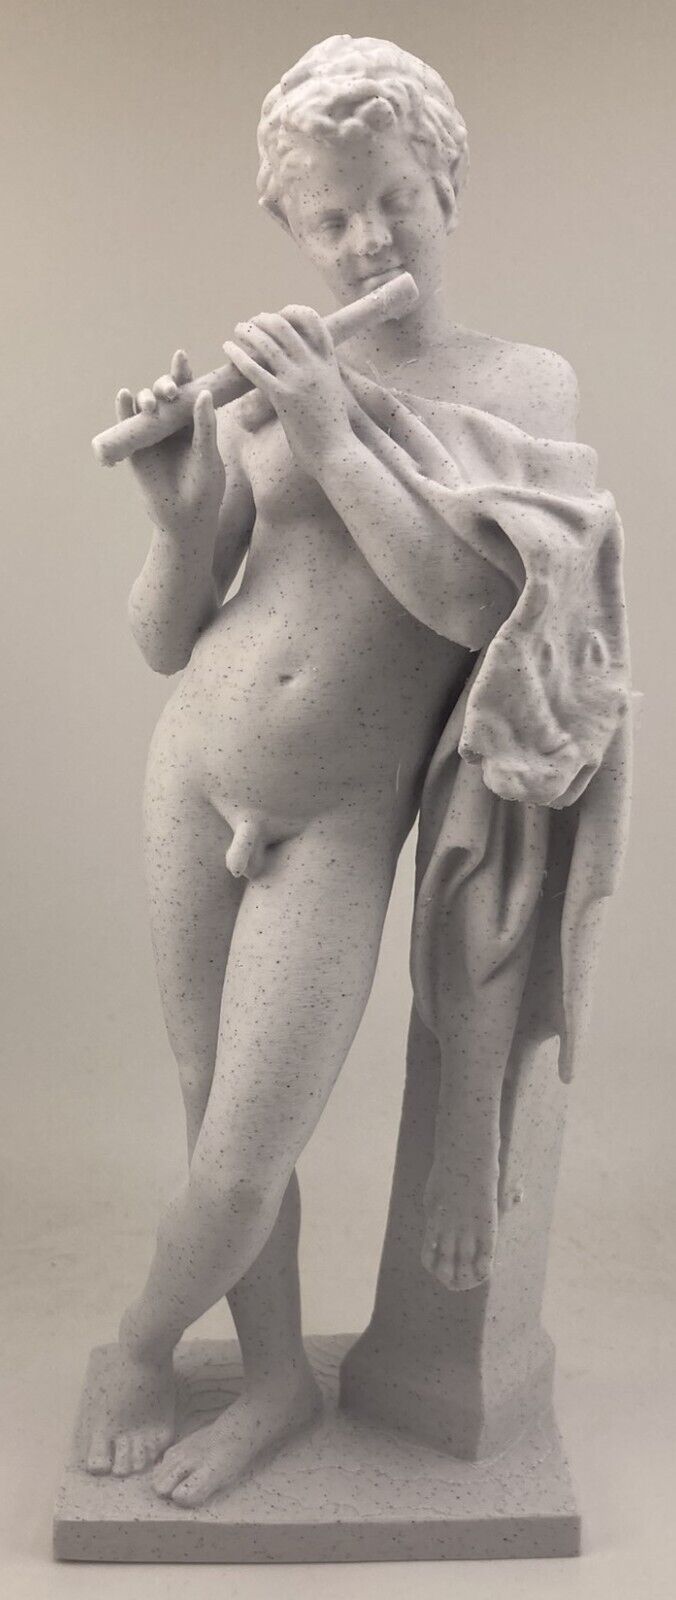 GREEK SCULPTURE THE PIPING FAUN 9.8 INCH/250 MM, MUSEUM REPRODUCTION